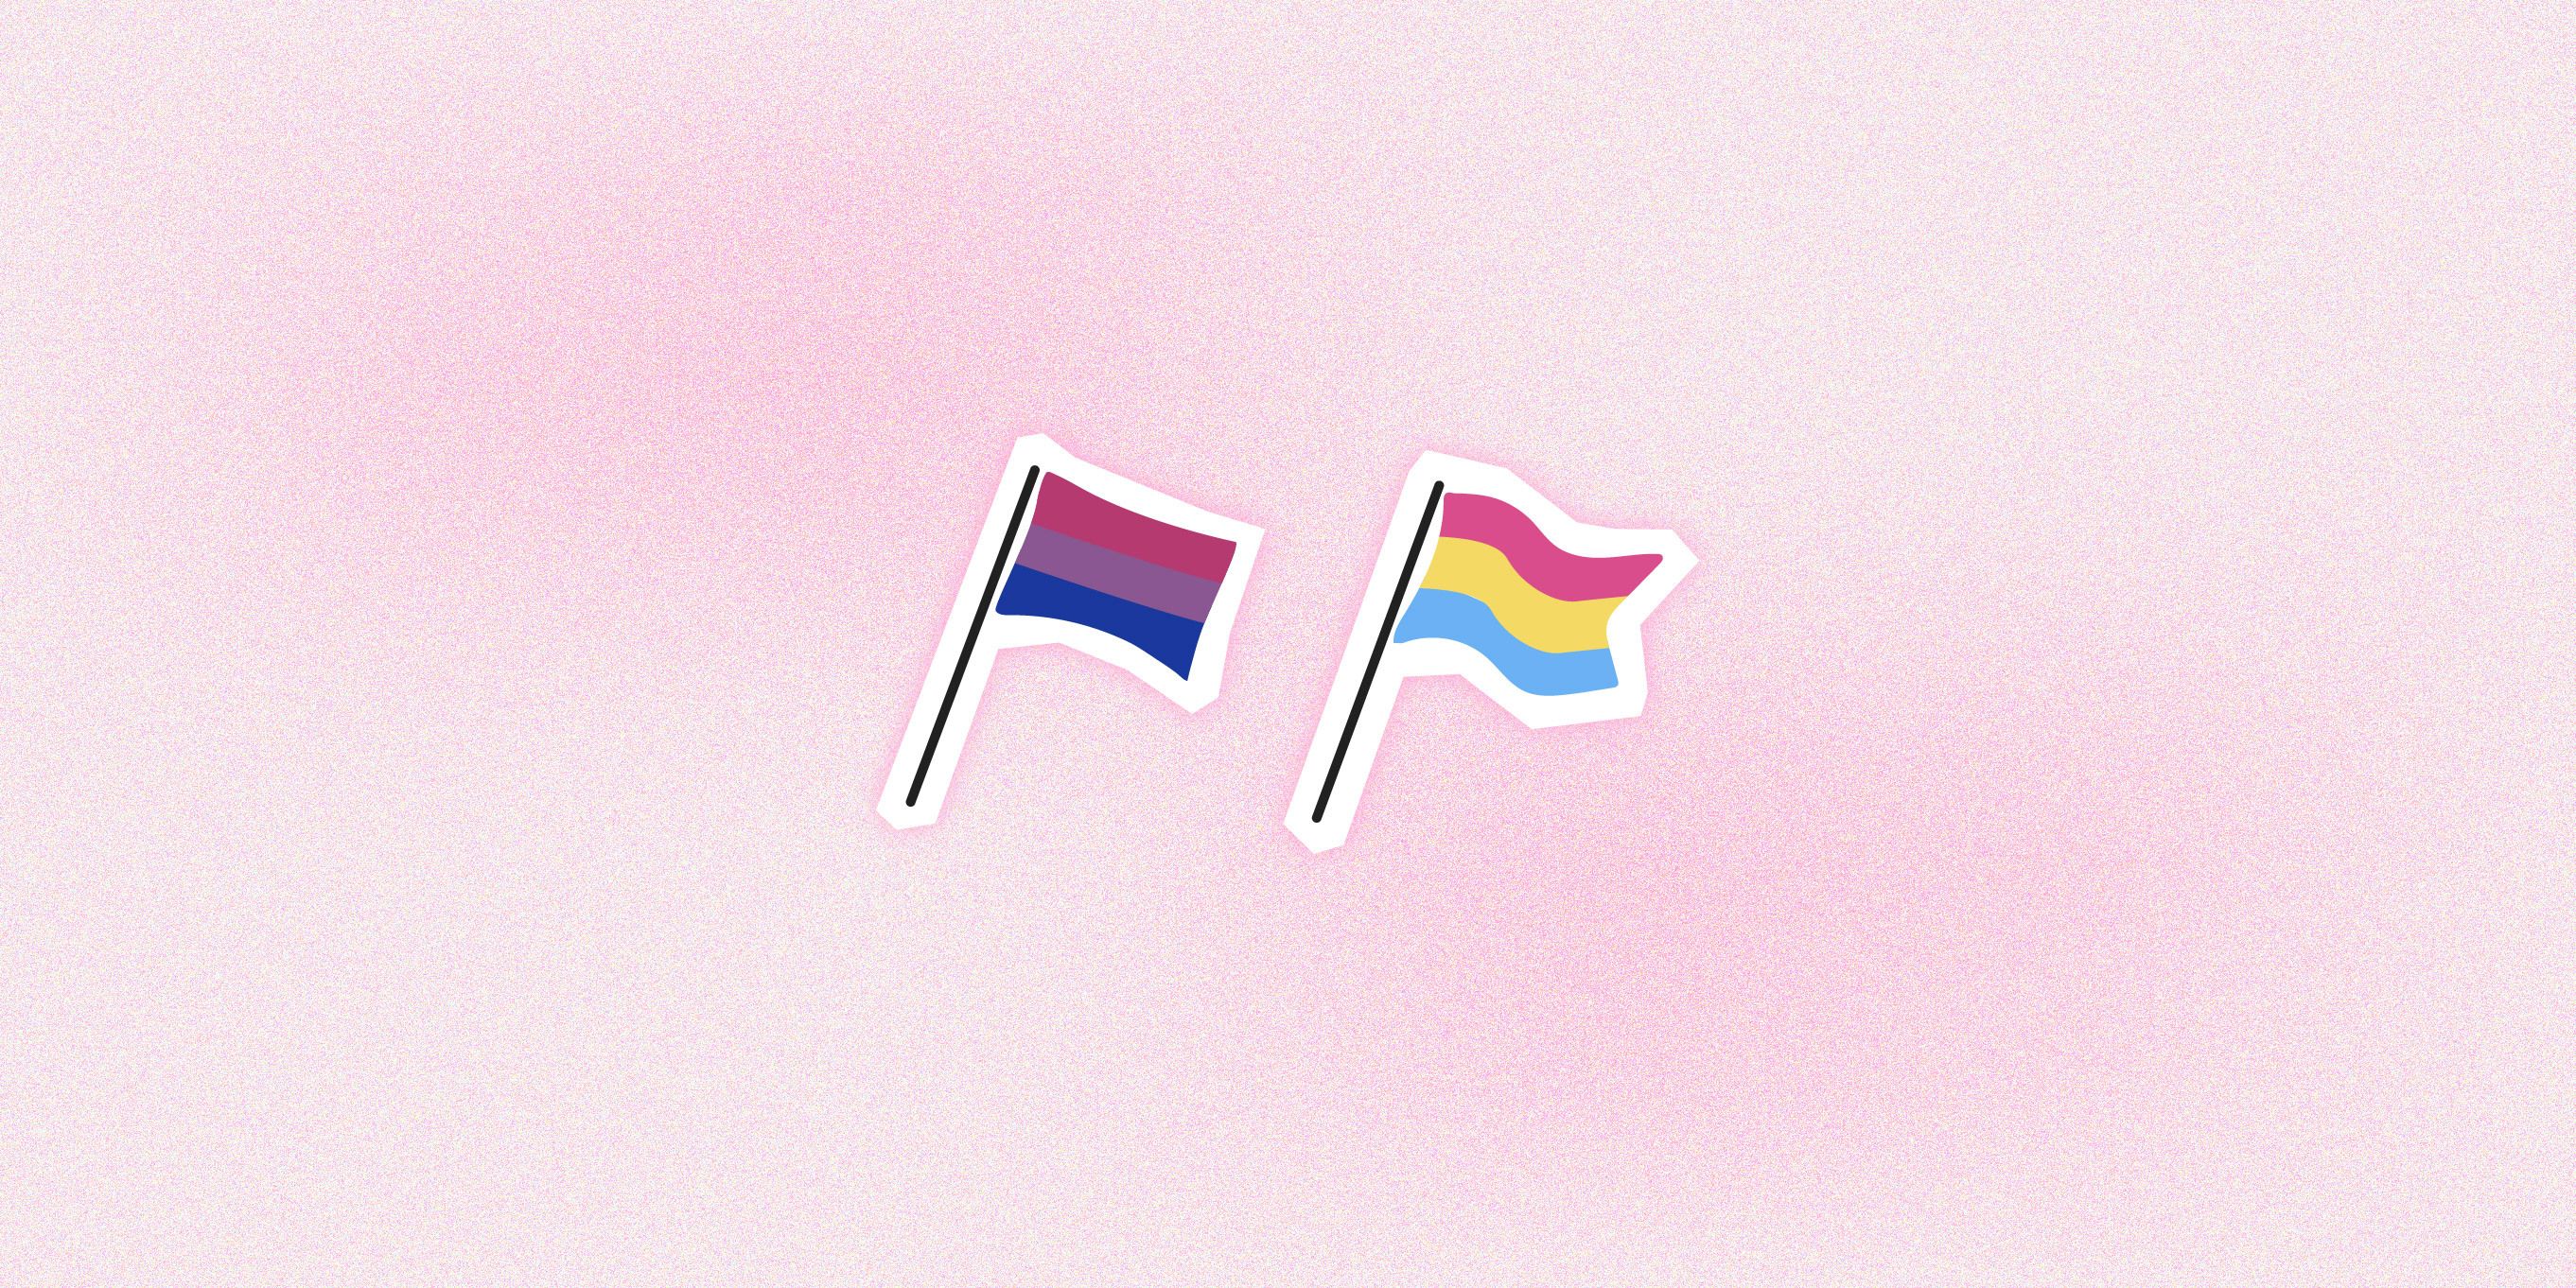 Meaning of inverted stripes in trans flag? : r/QueerVexillology